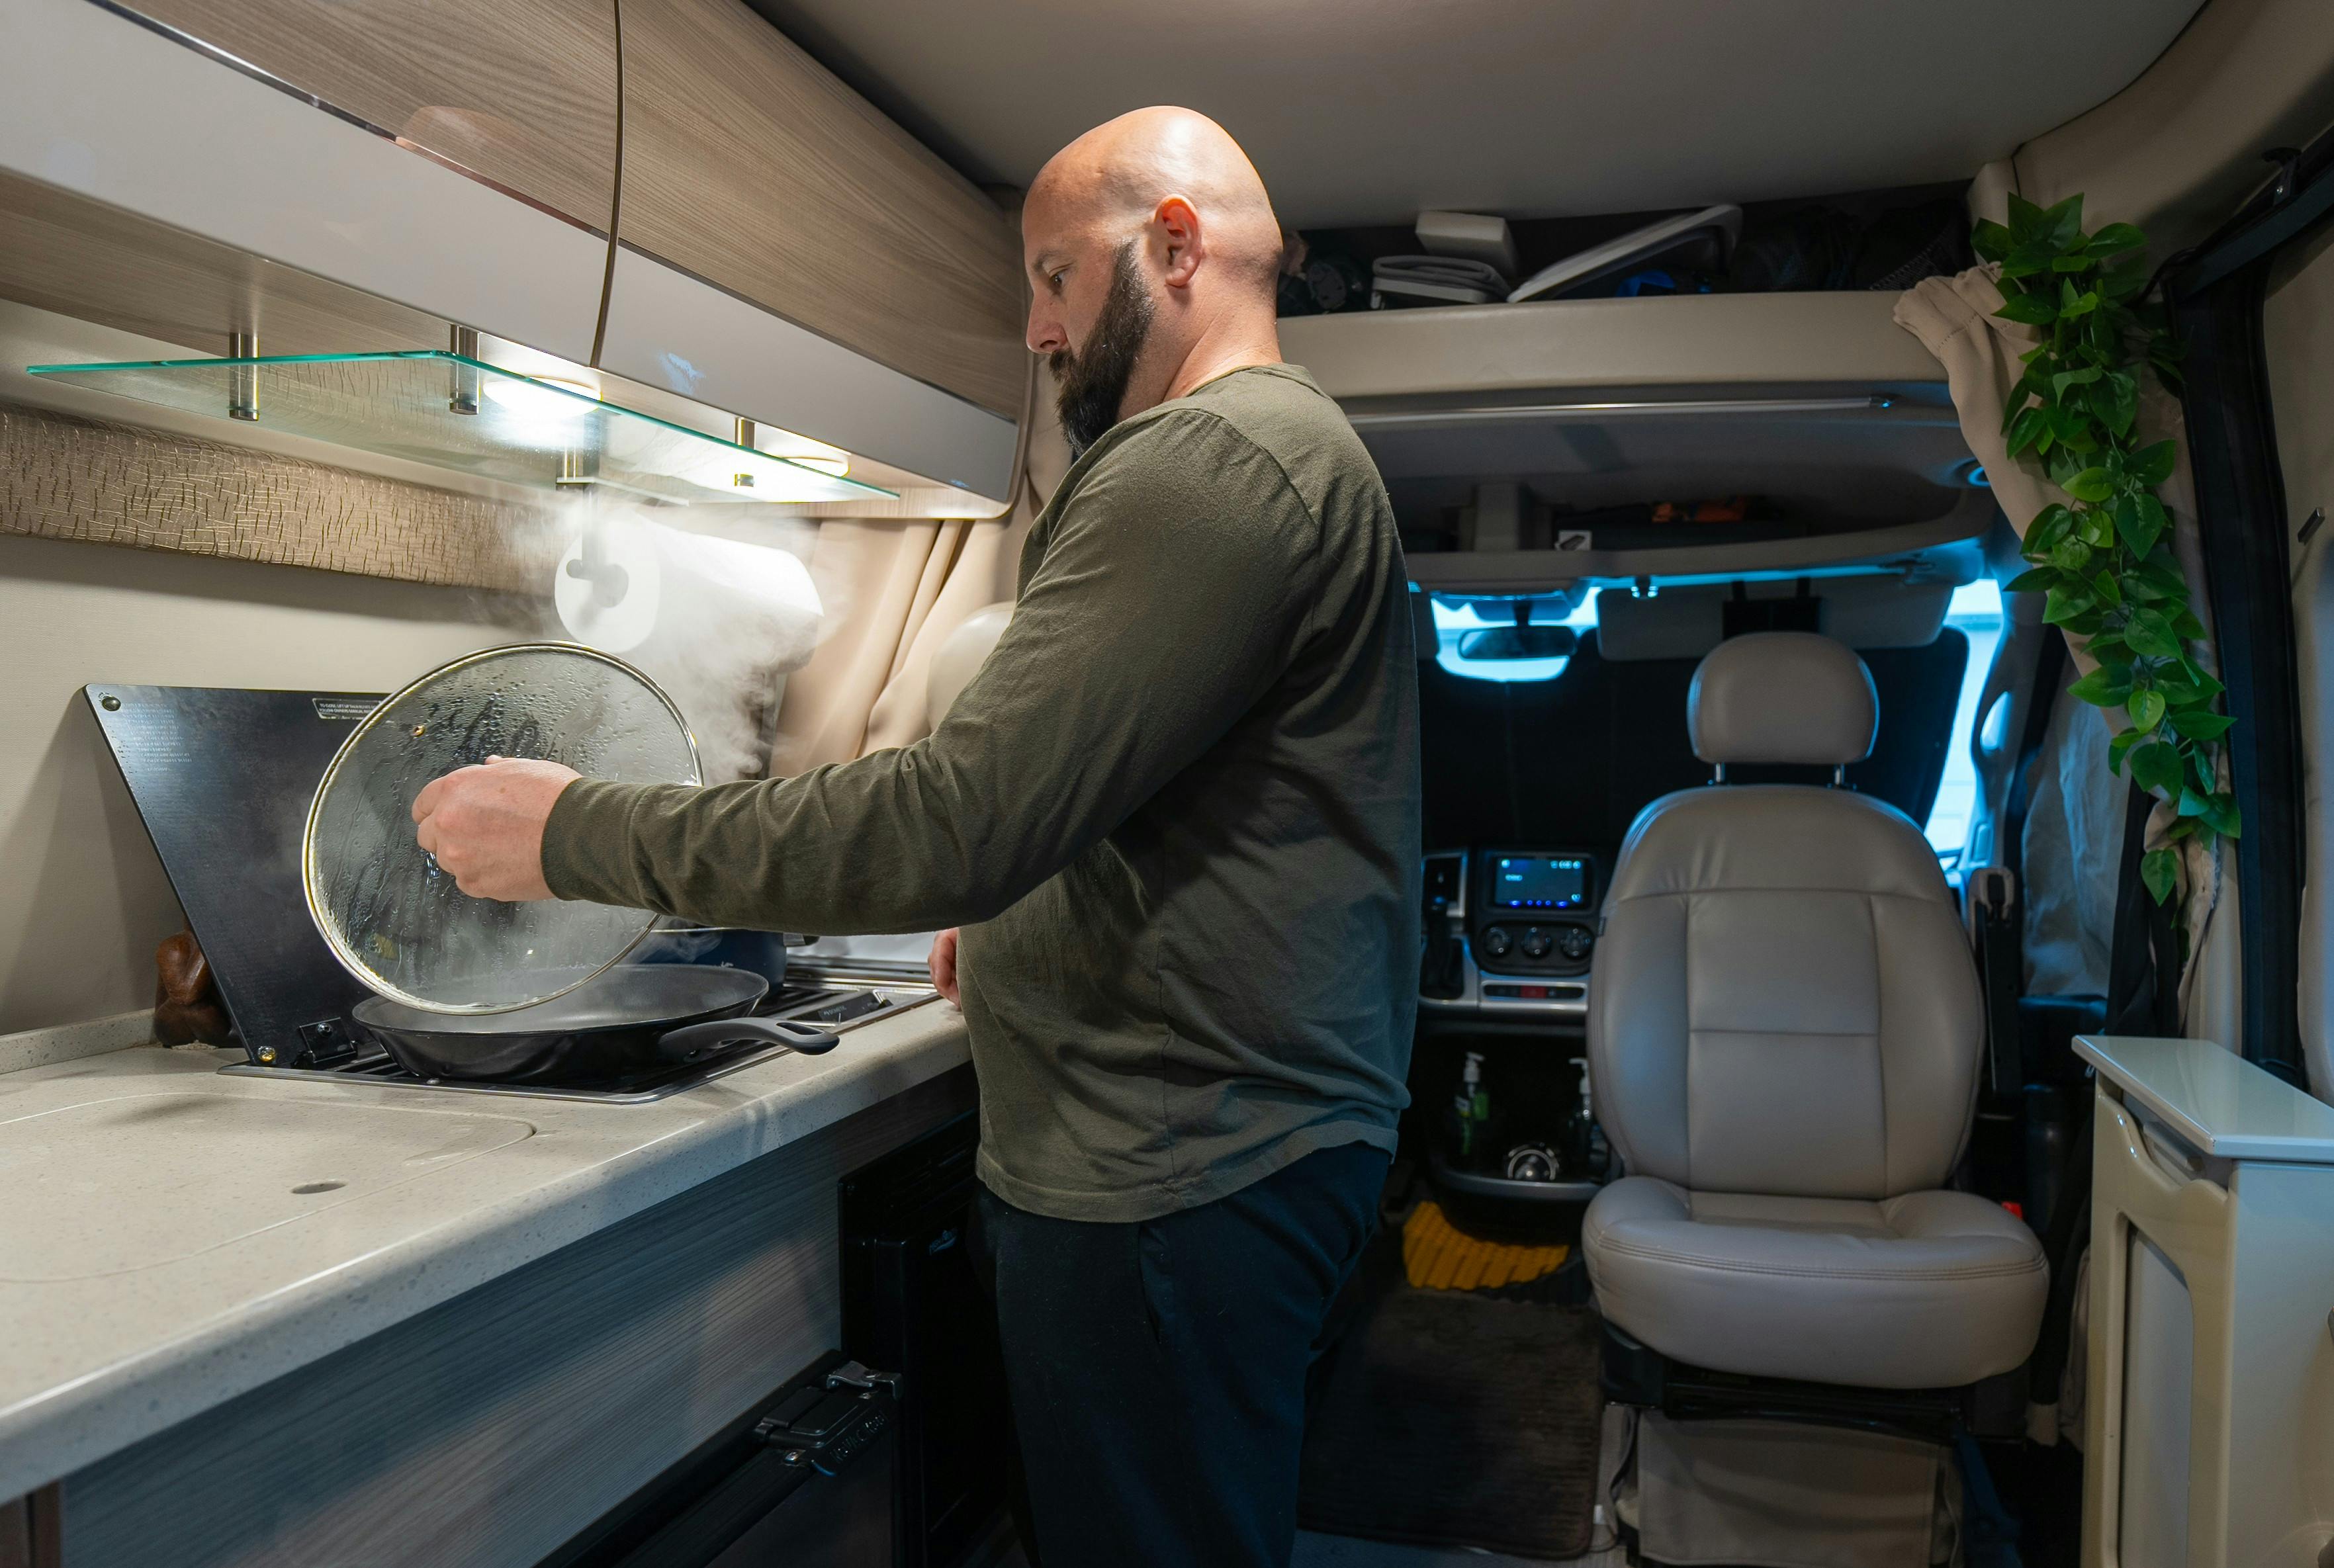 Gabe Rivero cooking on the gas burner stovetop inside his Thor Motor Coach Sequence.